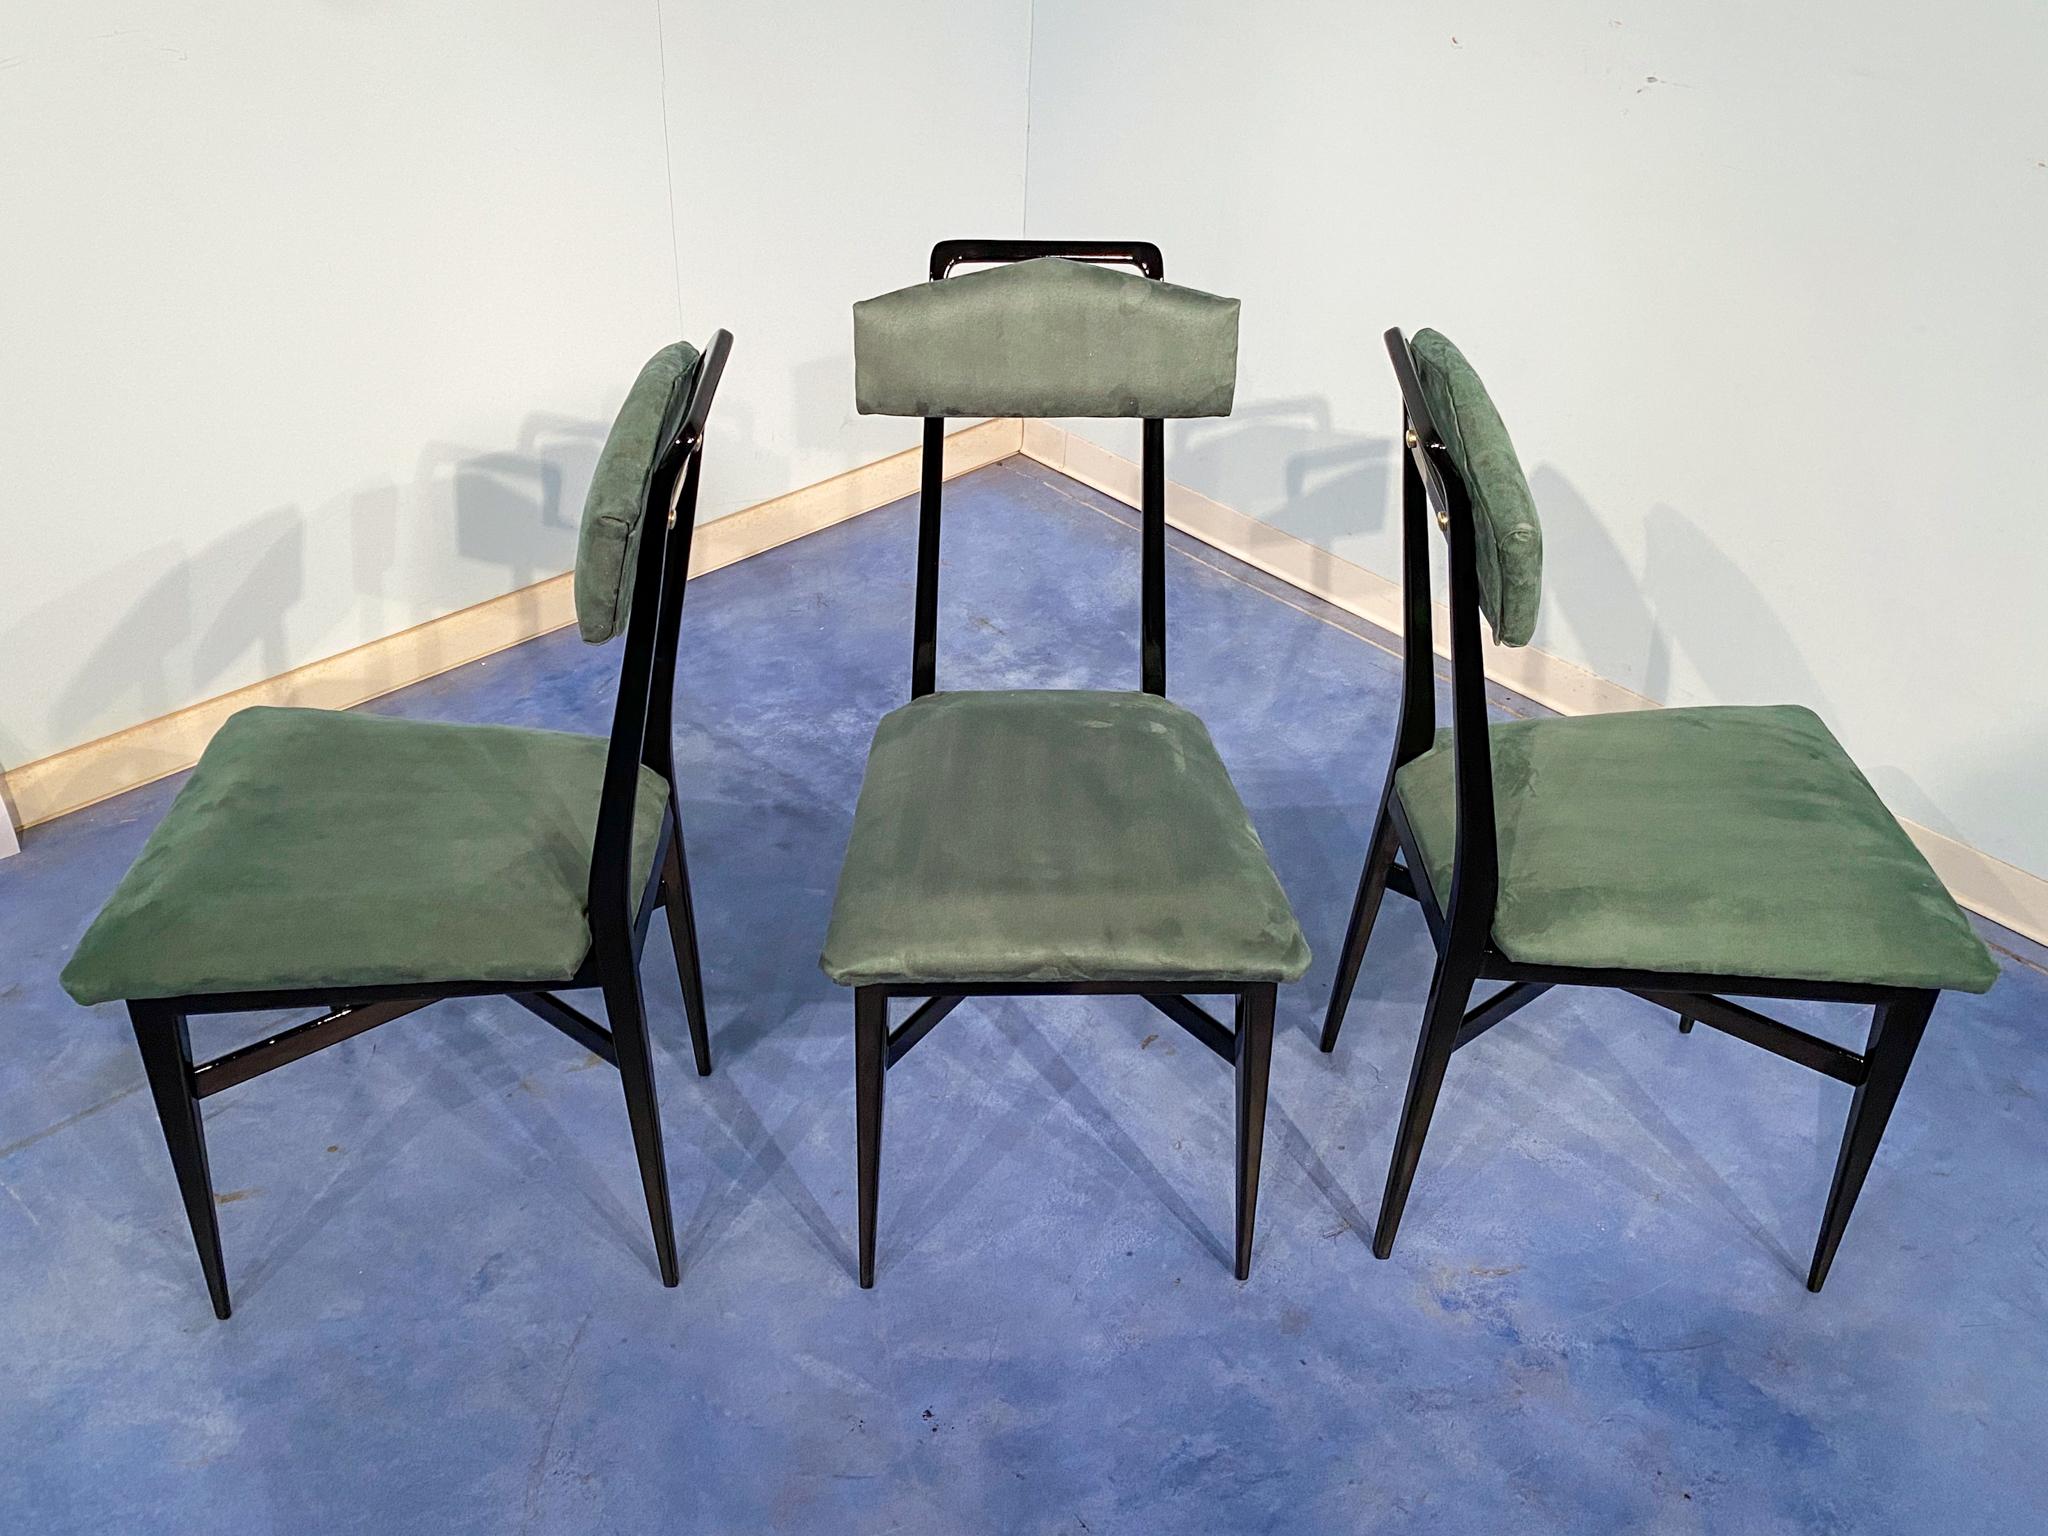 Italian Mid-Century Black and Green Color Dining Chairs, Set of Six, 1950s For Sale 3